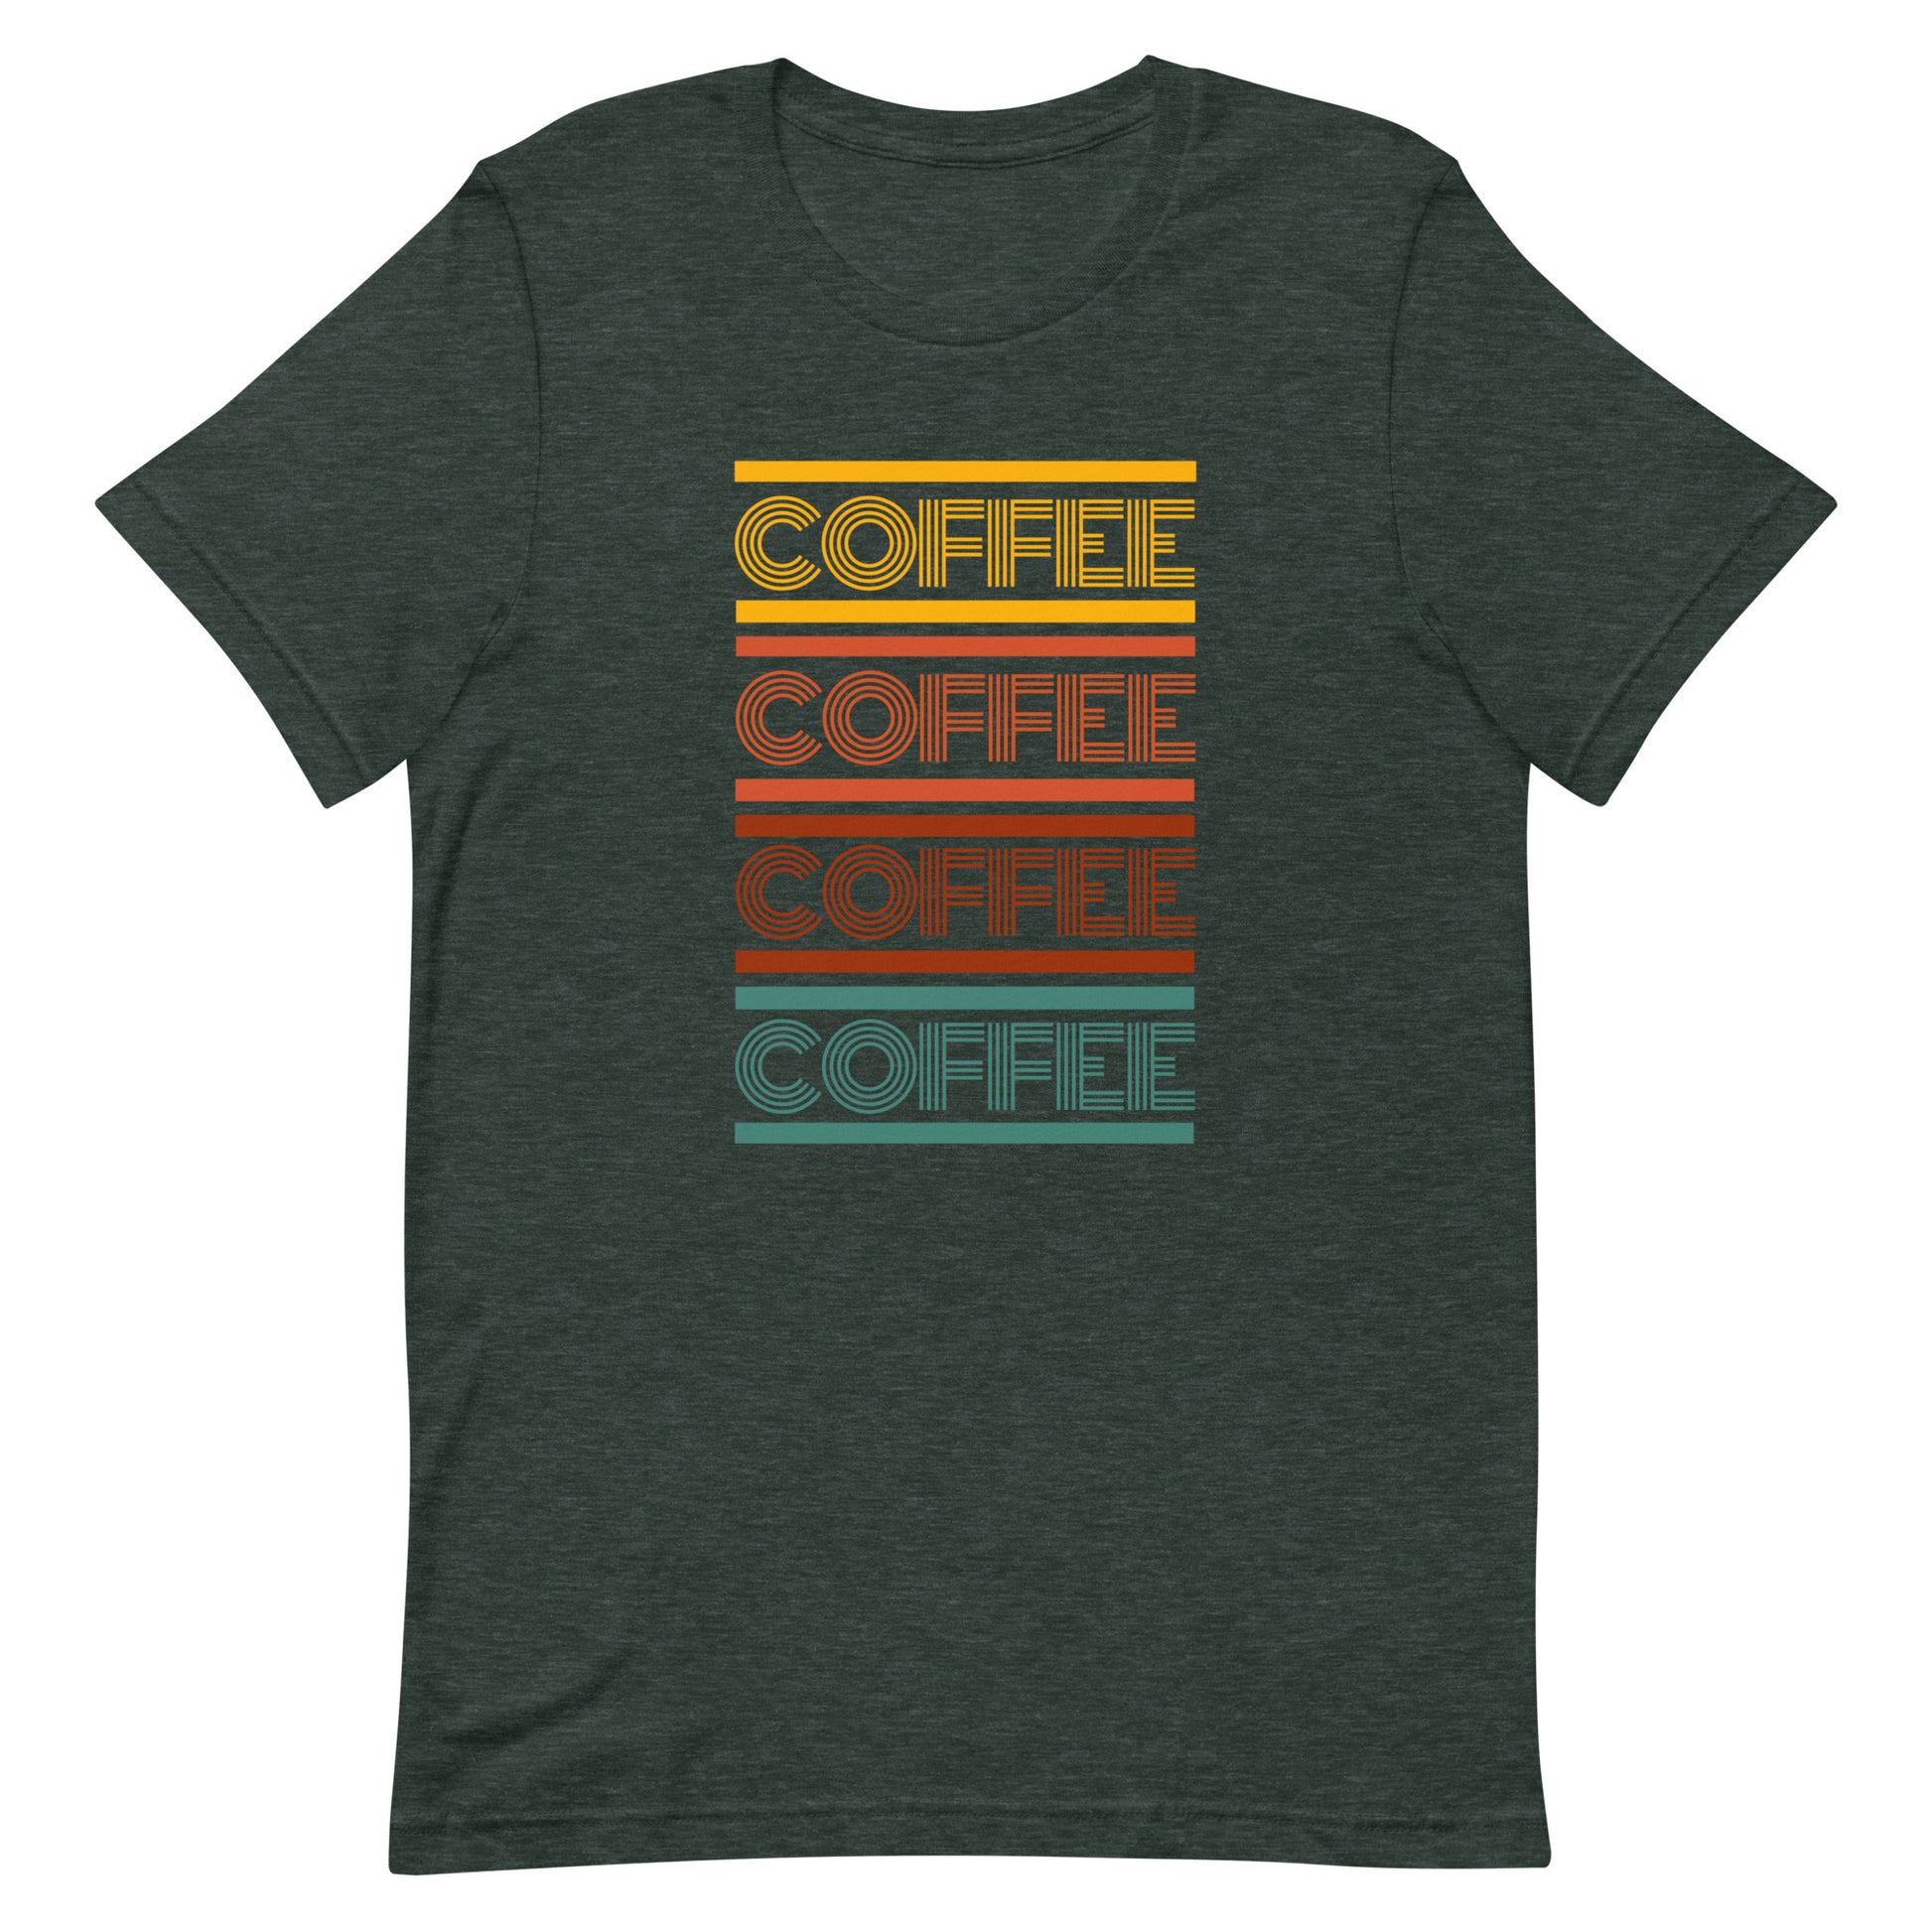 A heather forest green coffee t-shirt that has the words coffee repeated in a retro inspired font.